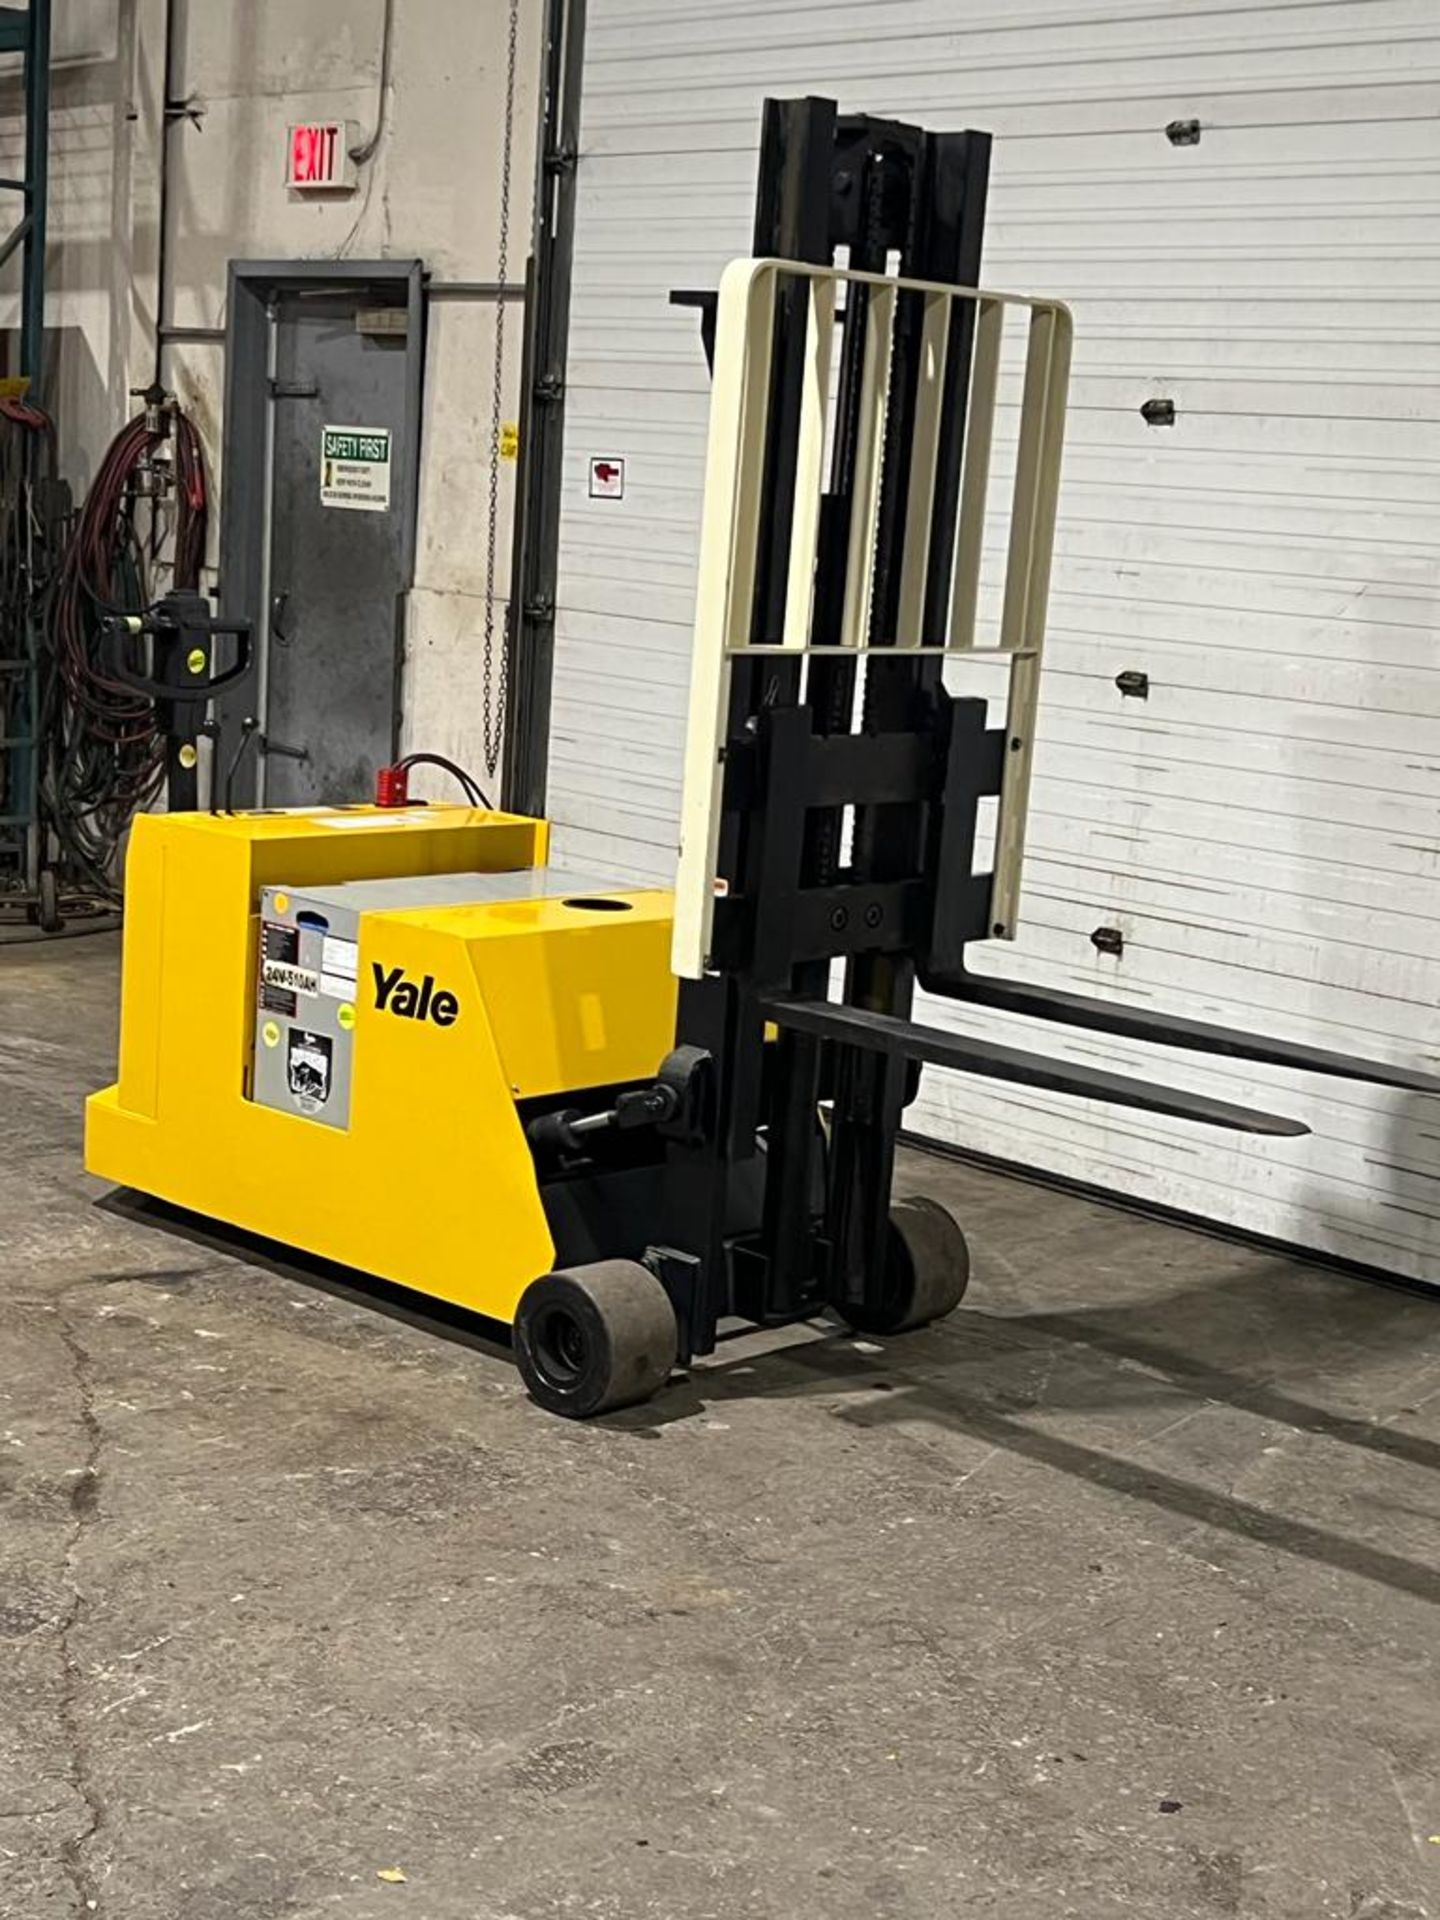 Yale / Hyster Pallet Stacker Walk Behind 4,000lbs capacity electric Powered Pallet Cart 24V with